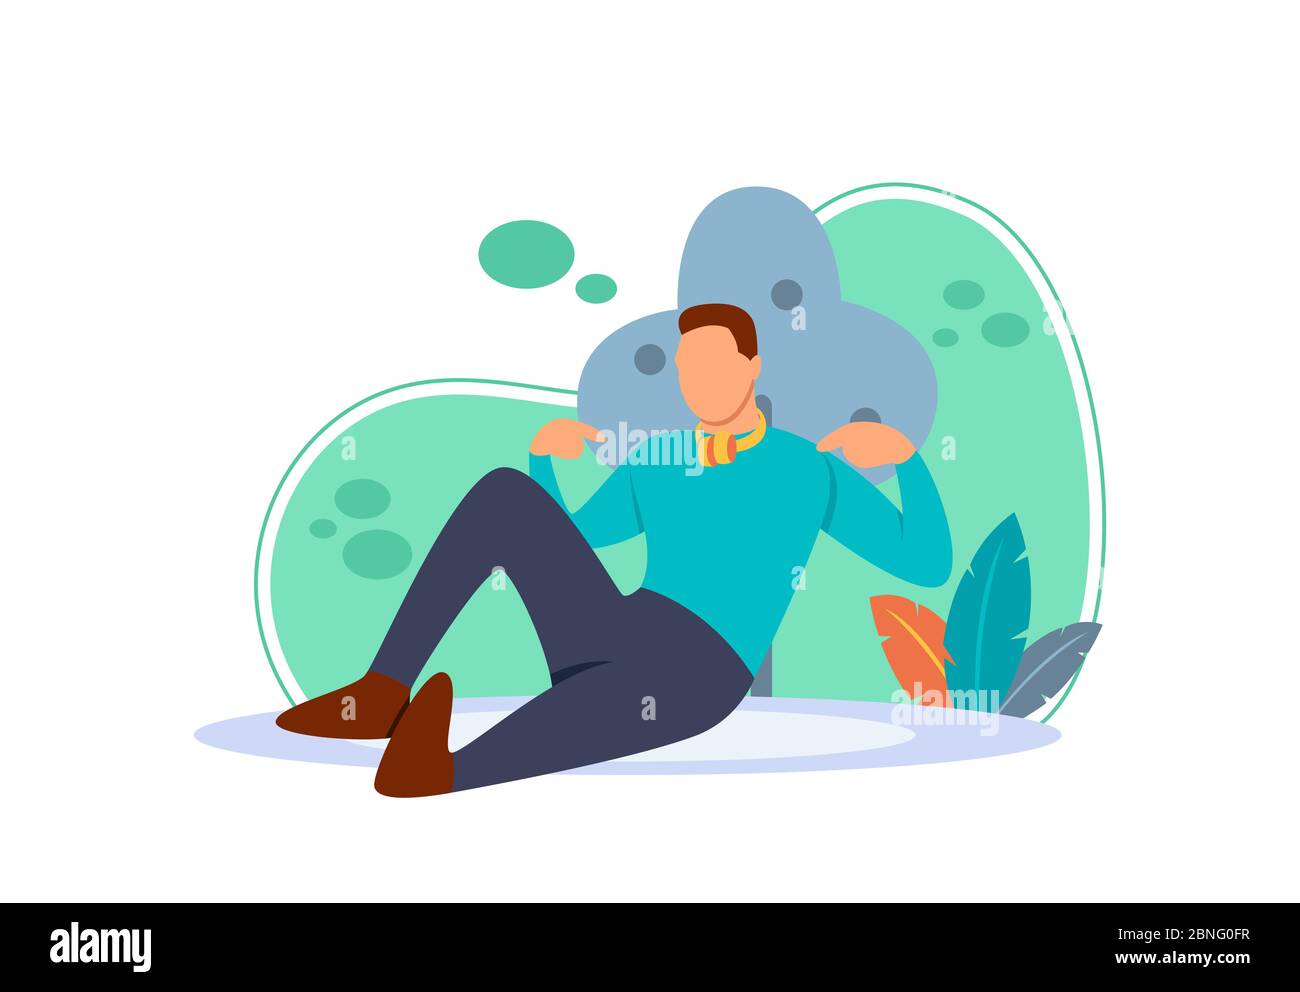 Flat illustration of a boy sitting near a tree and using a headset. flat cartoon character with the concept of someone who is enjoying life and happy. Stock Vector